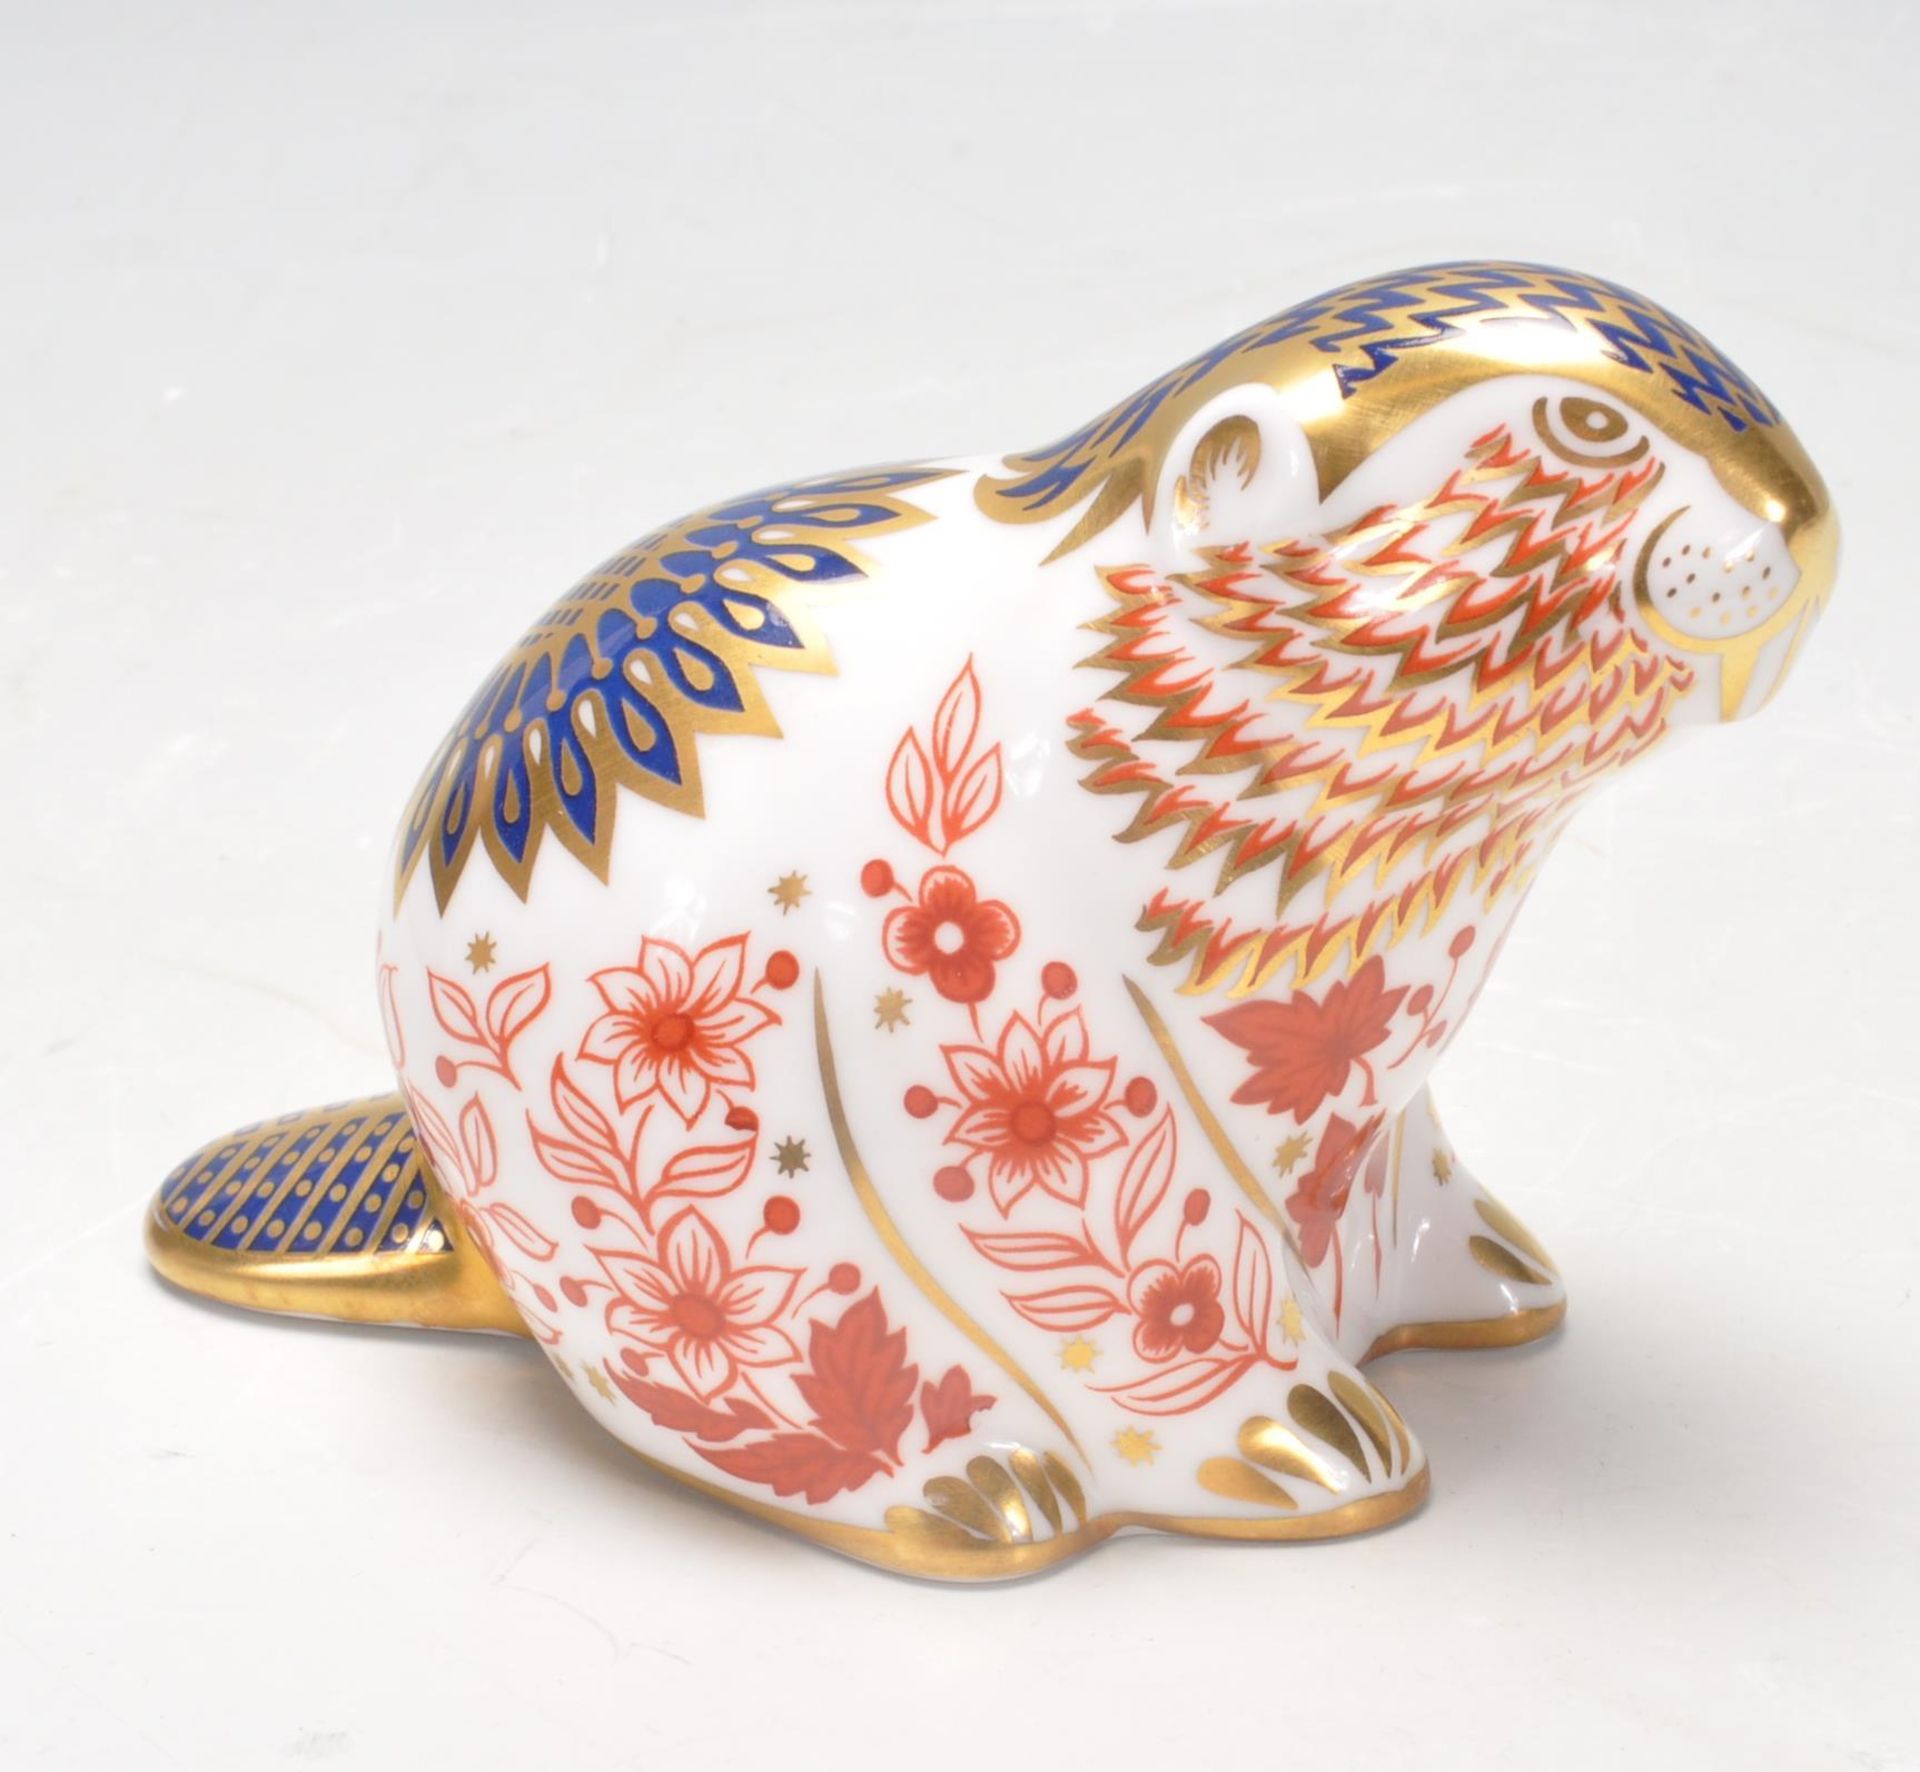 ROYAL CROWN DERBY BEAVER PAPERWEIGHT - Image 4 of 6